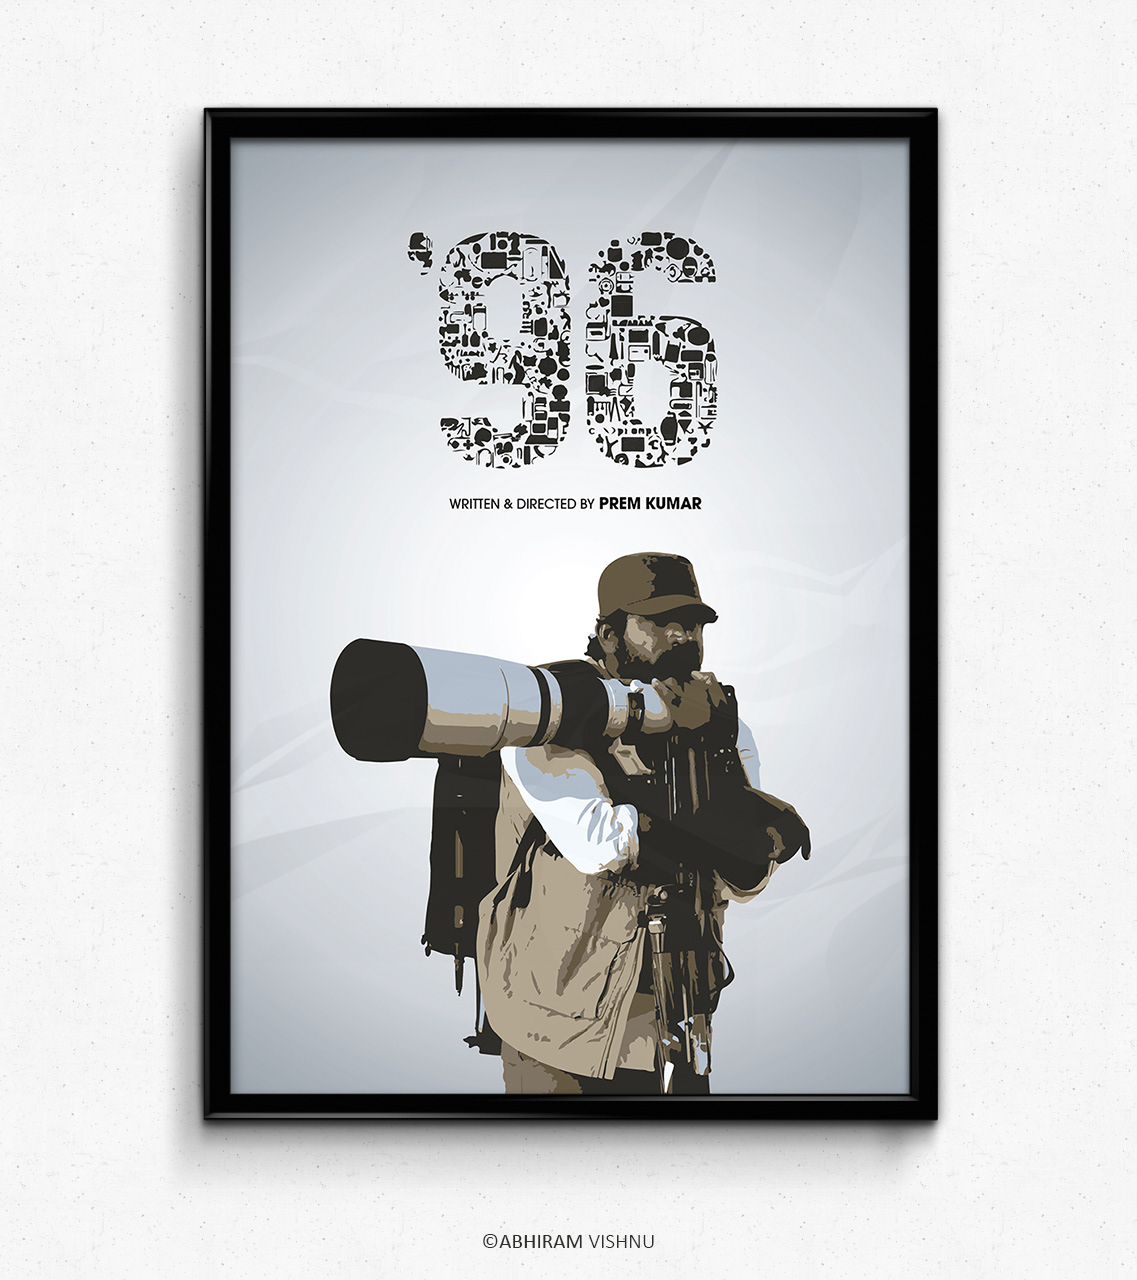 96 | MOVIE MINMAL POSTER on Behance